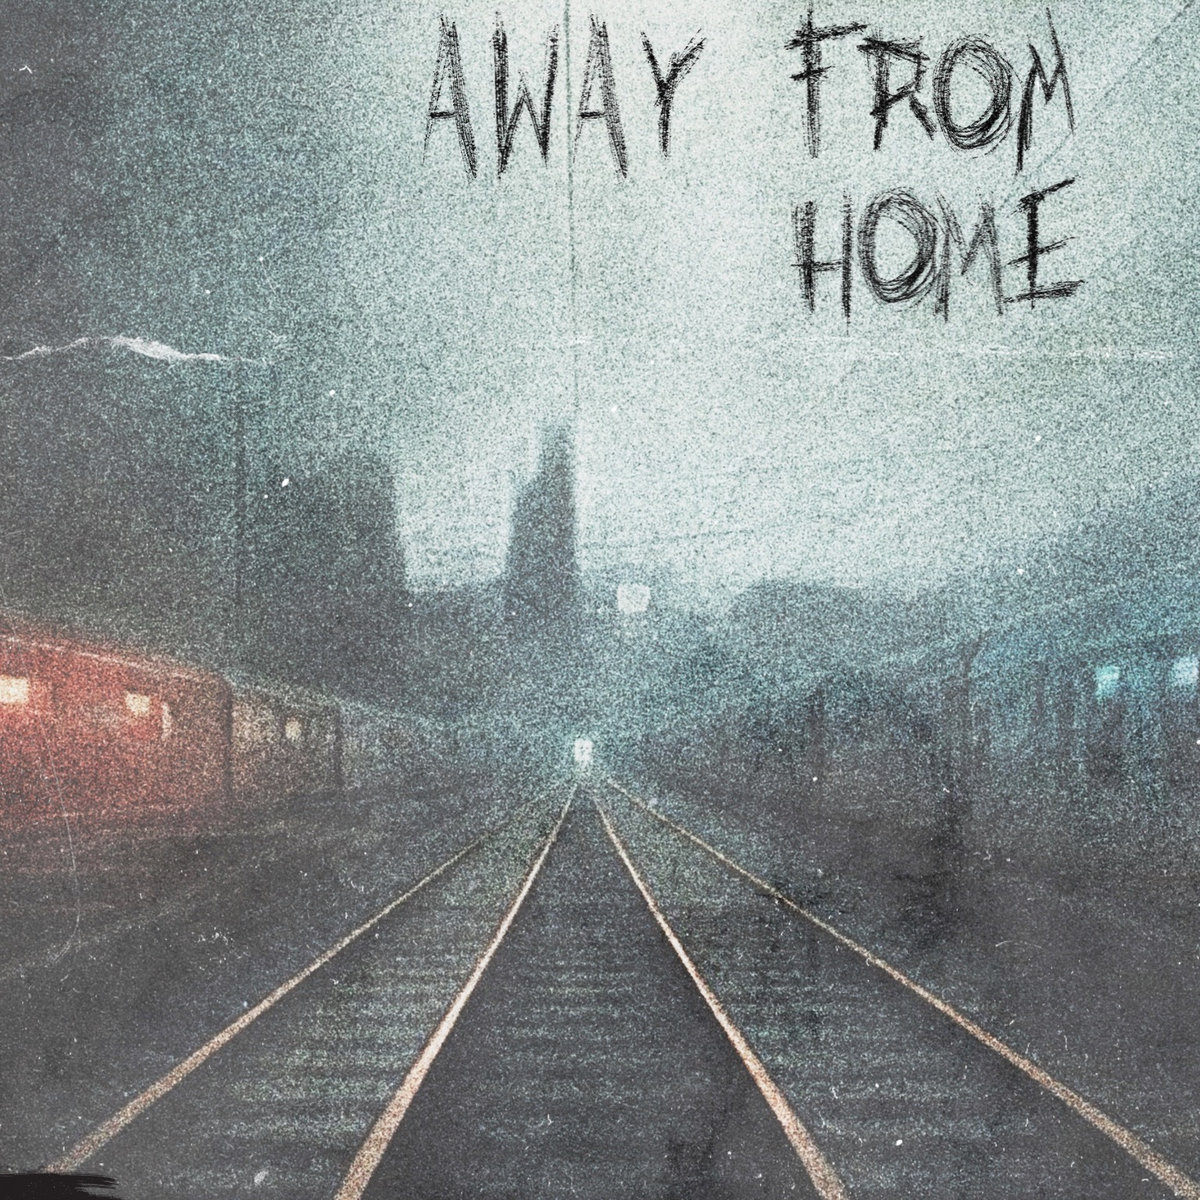 AWAY FROM HOME